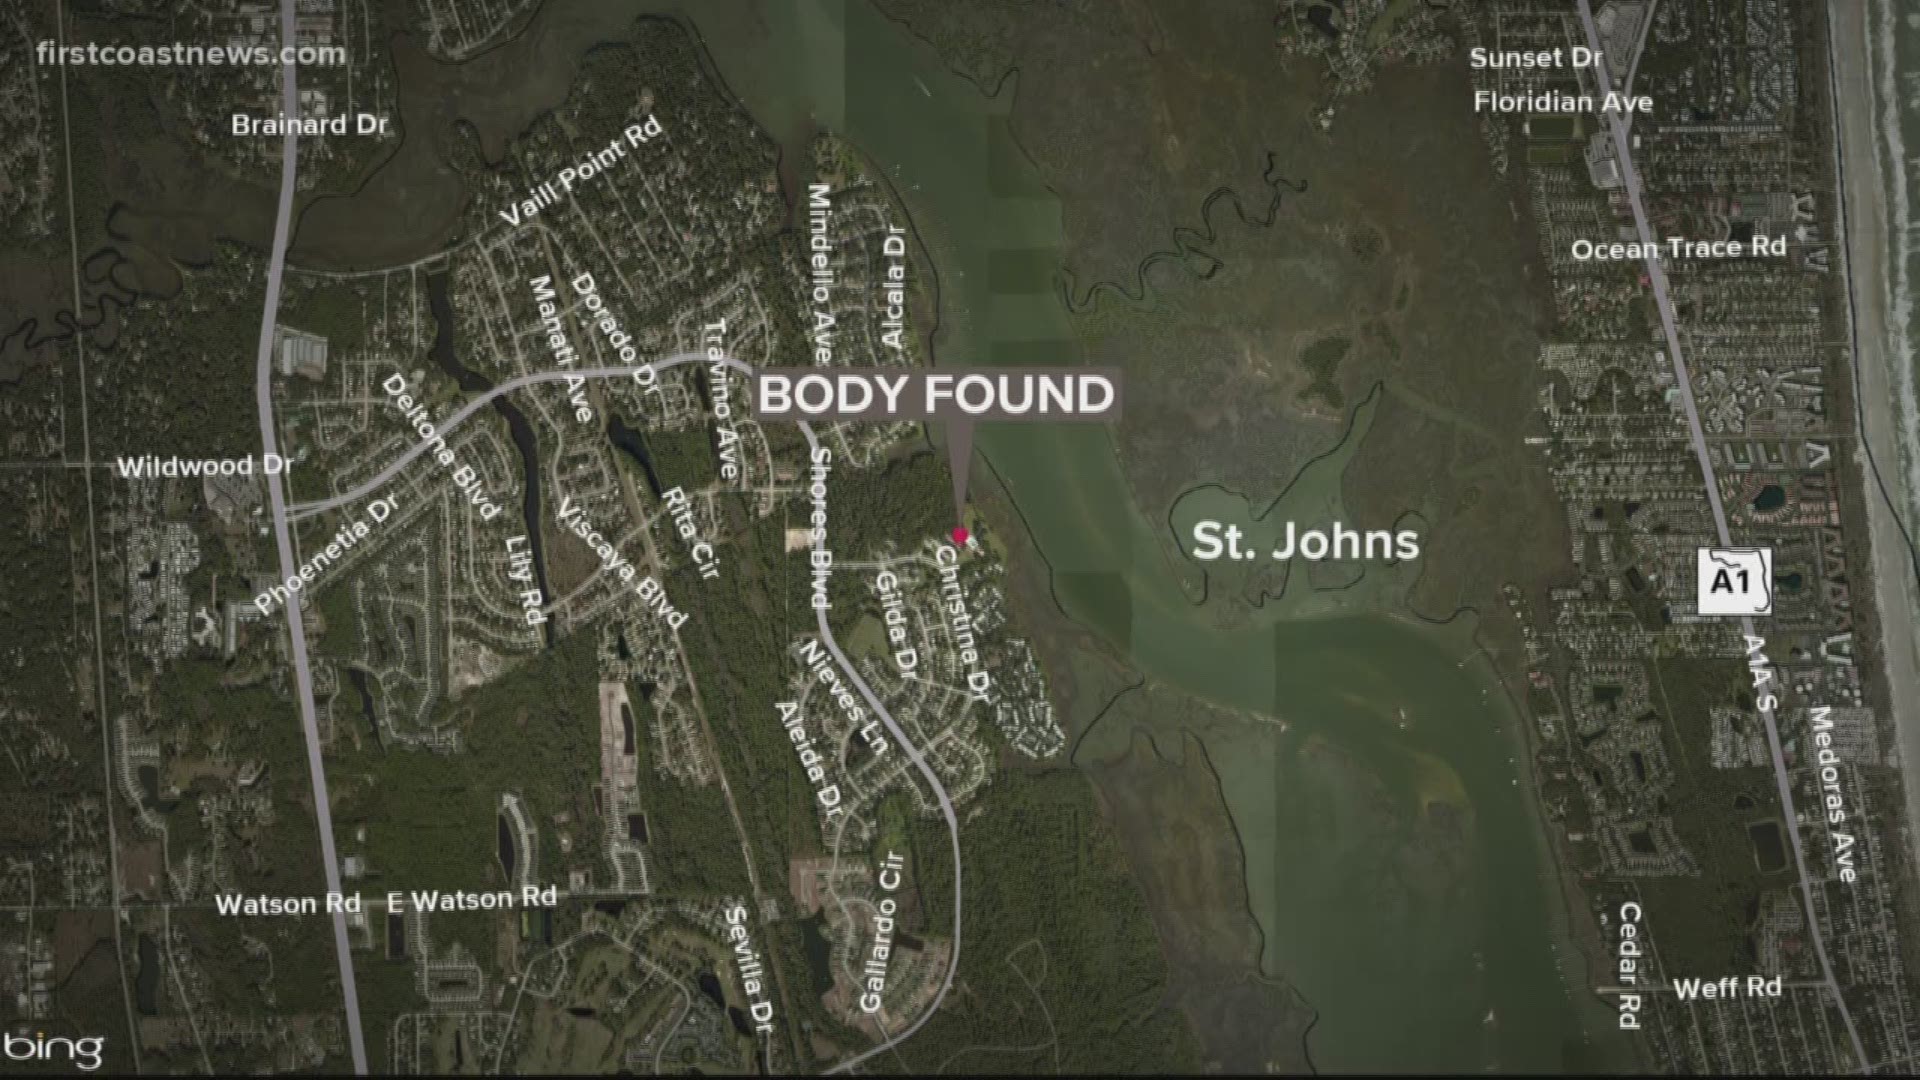 The body was found floating in the Intracoastal Waterway. Authorities are now trying to determine the person's identity.